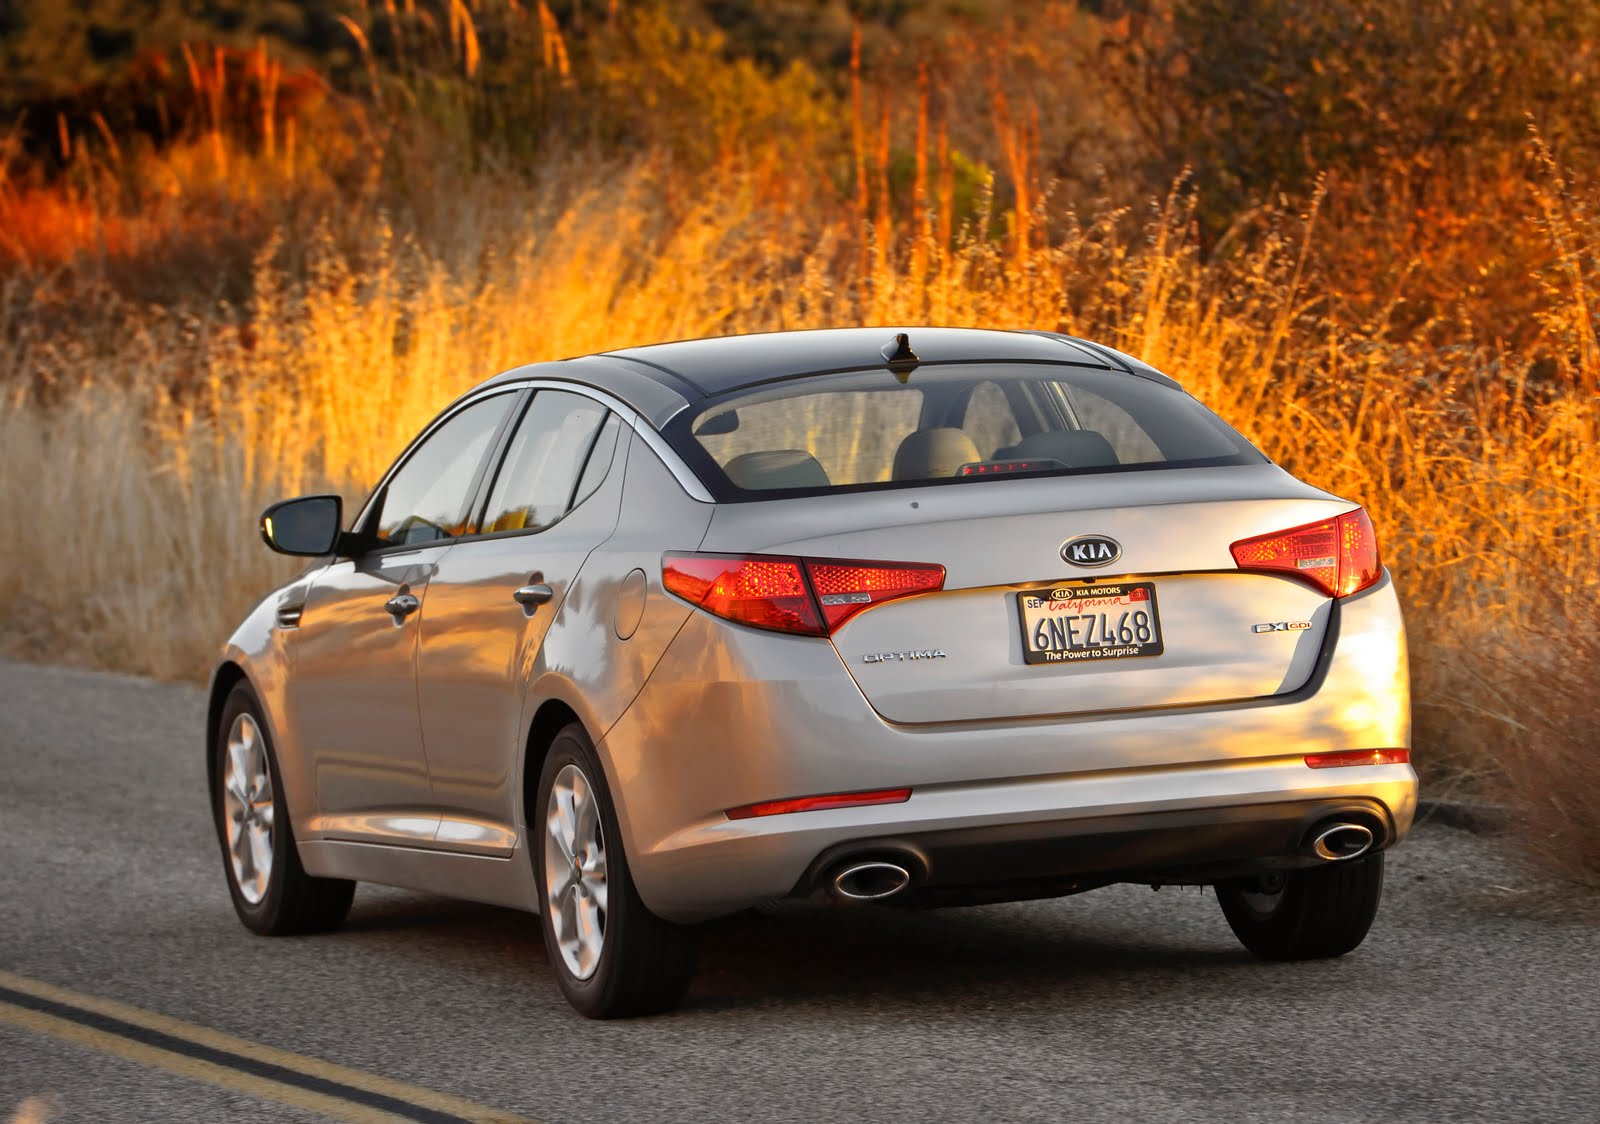 new and modern cars: 2011 Kia Optima Officially Launched in the US